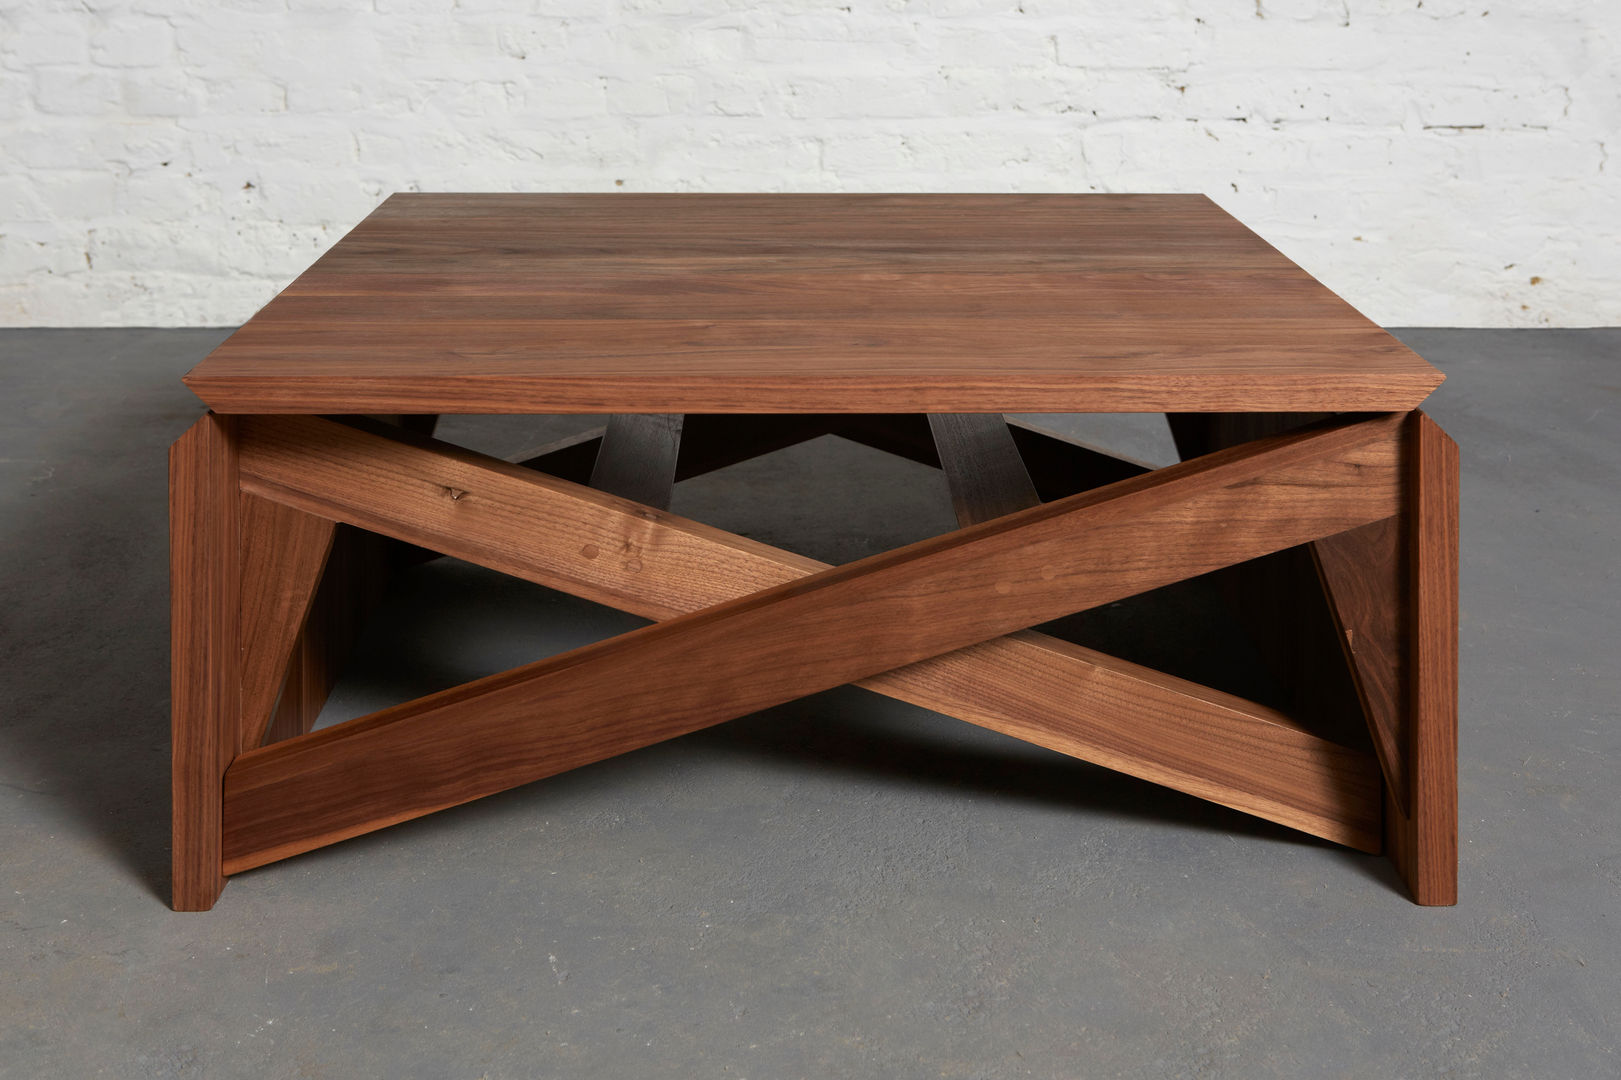 MK1 TRANSFORMING COFFEE TABLE WOOD Duffy London Eclectic style houses